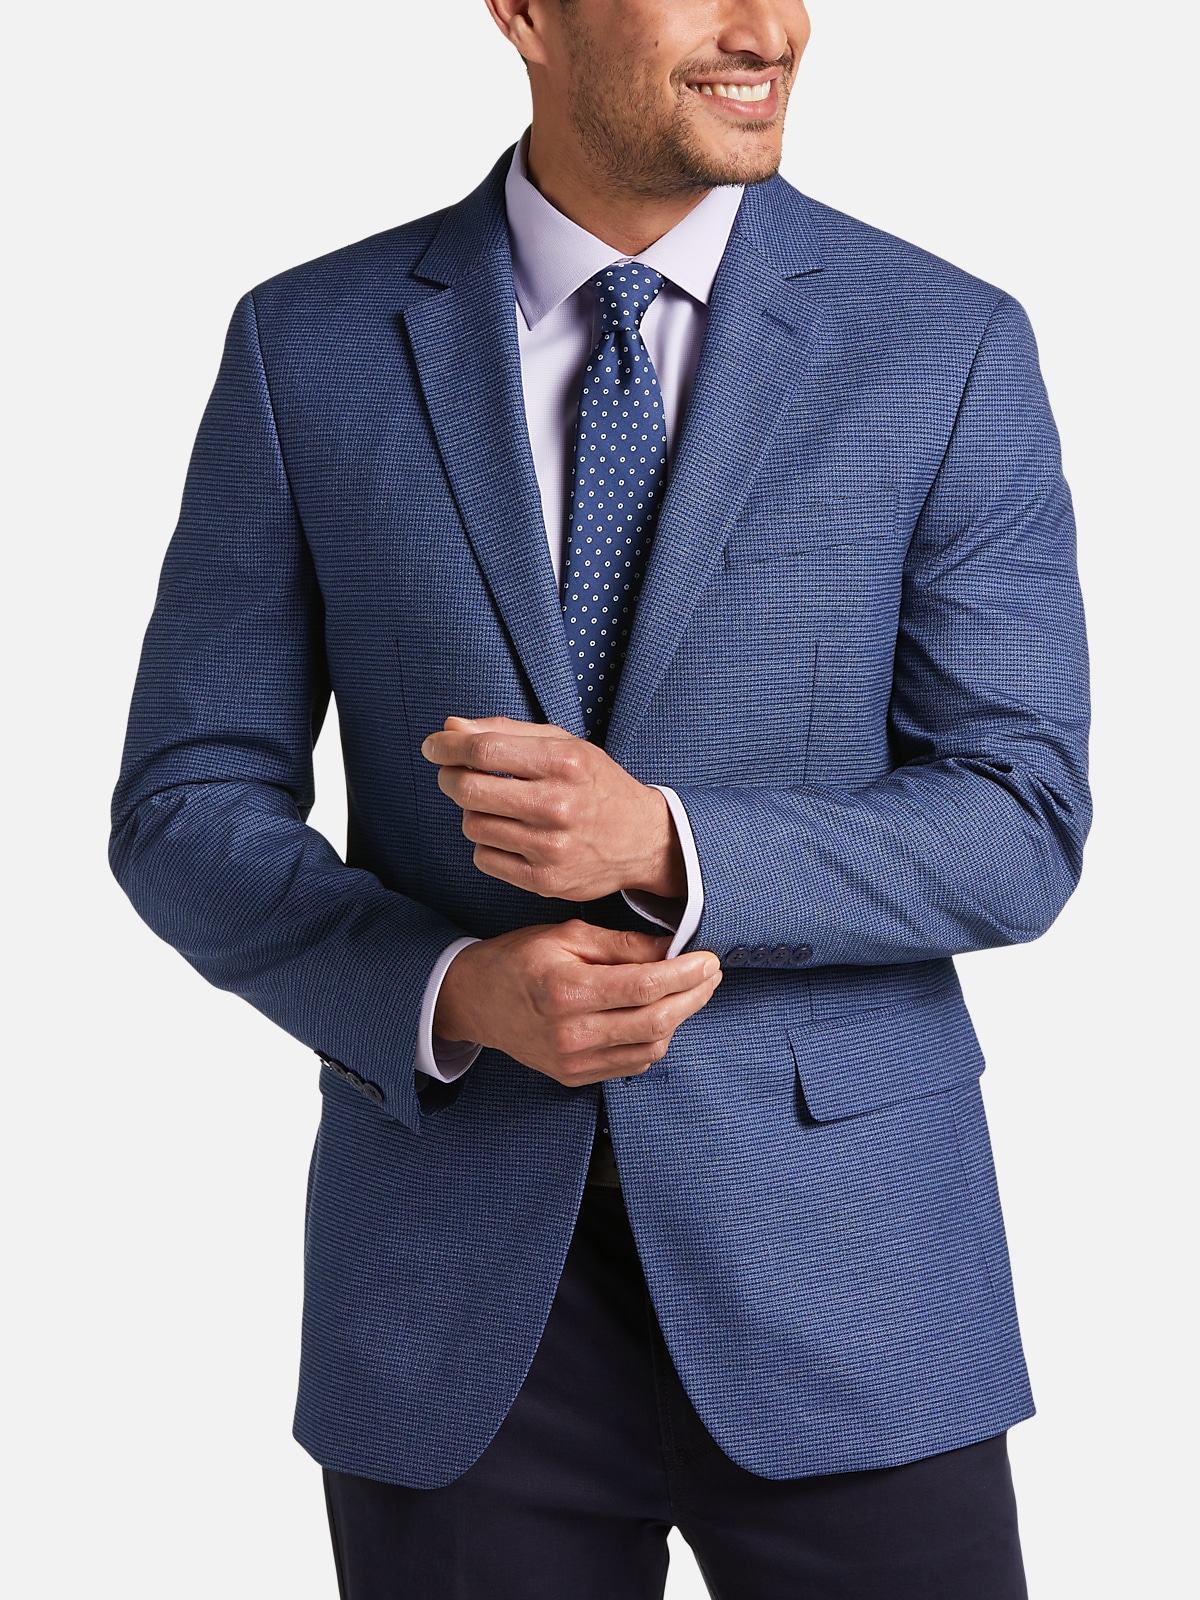 Michael Strahan Classic Fit Sport Coat | All Clothing| Men's Wearhouse